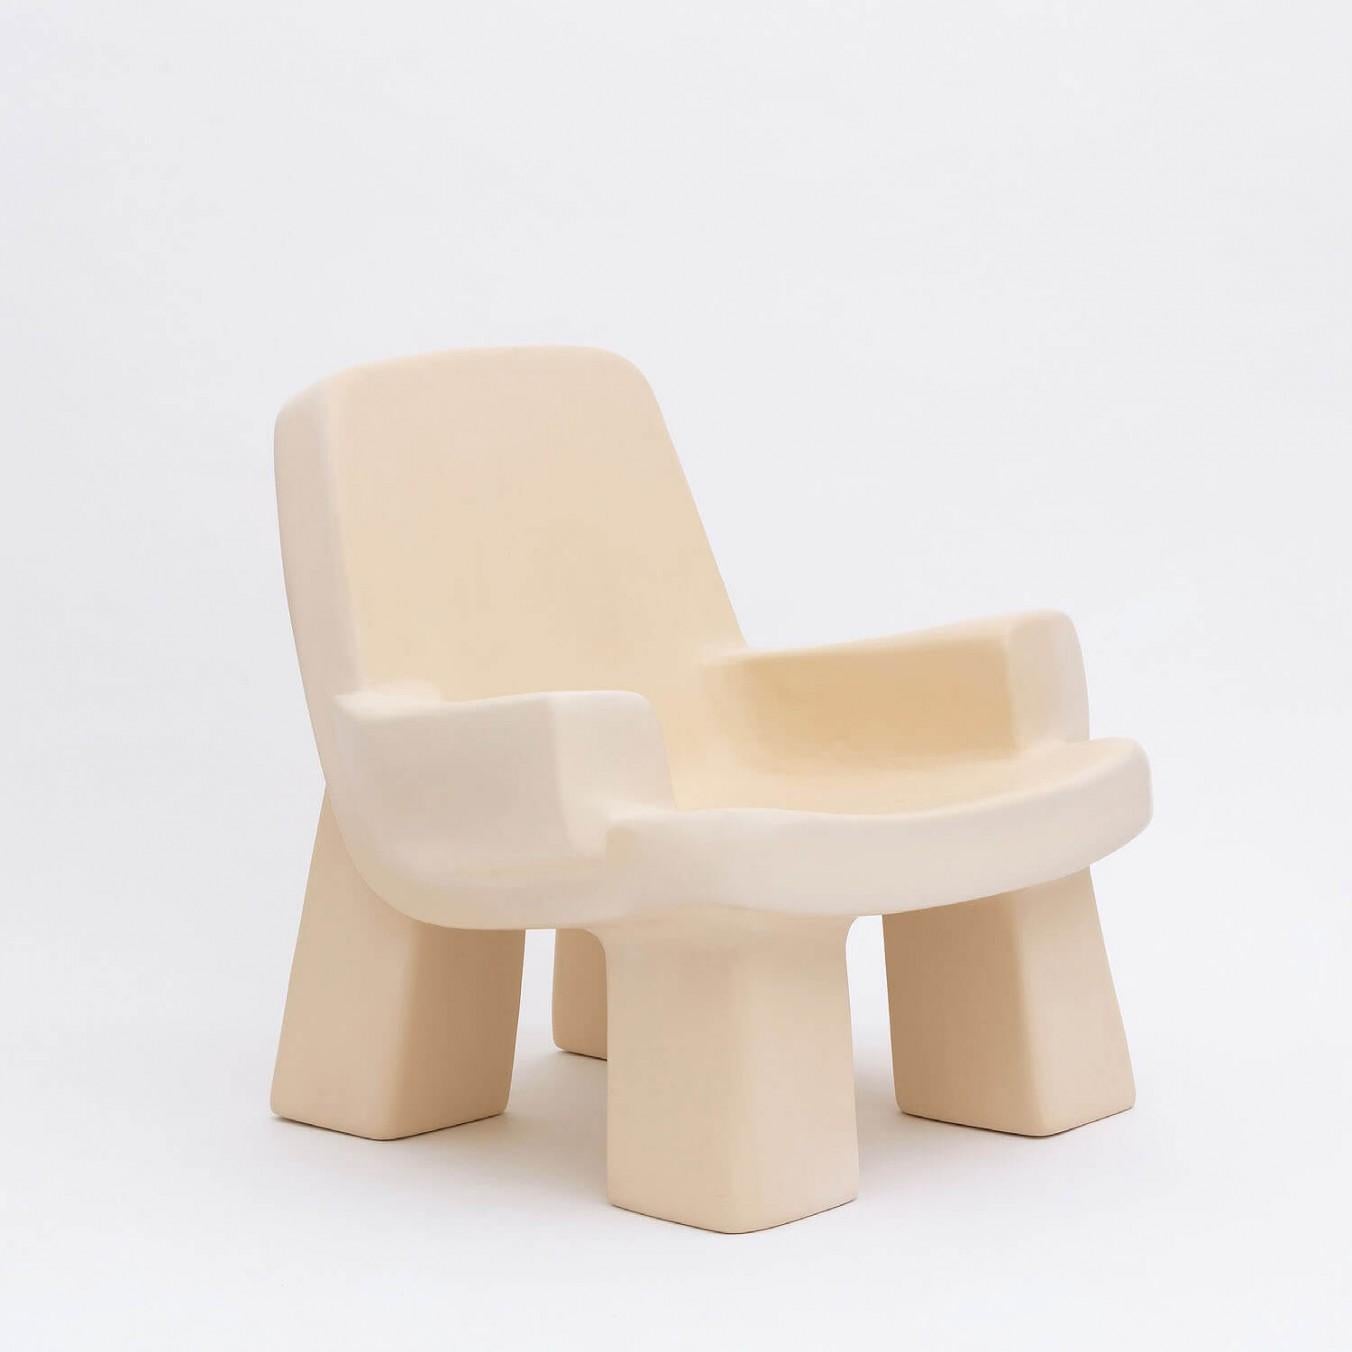 Contemporary fiberglass armchair - Fudge chair by Faye Toogood. This is shown in the mallow fiberglass finish. 
Design: Faye Toogood
Material: Fiberglass 
Available also in charcoal, cream or malachite opaque finish

Faye Toogood’s new Fudge